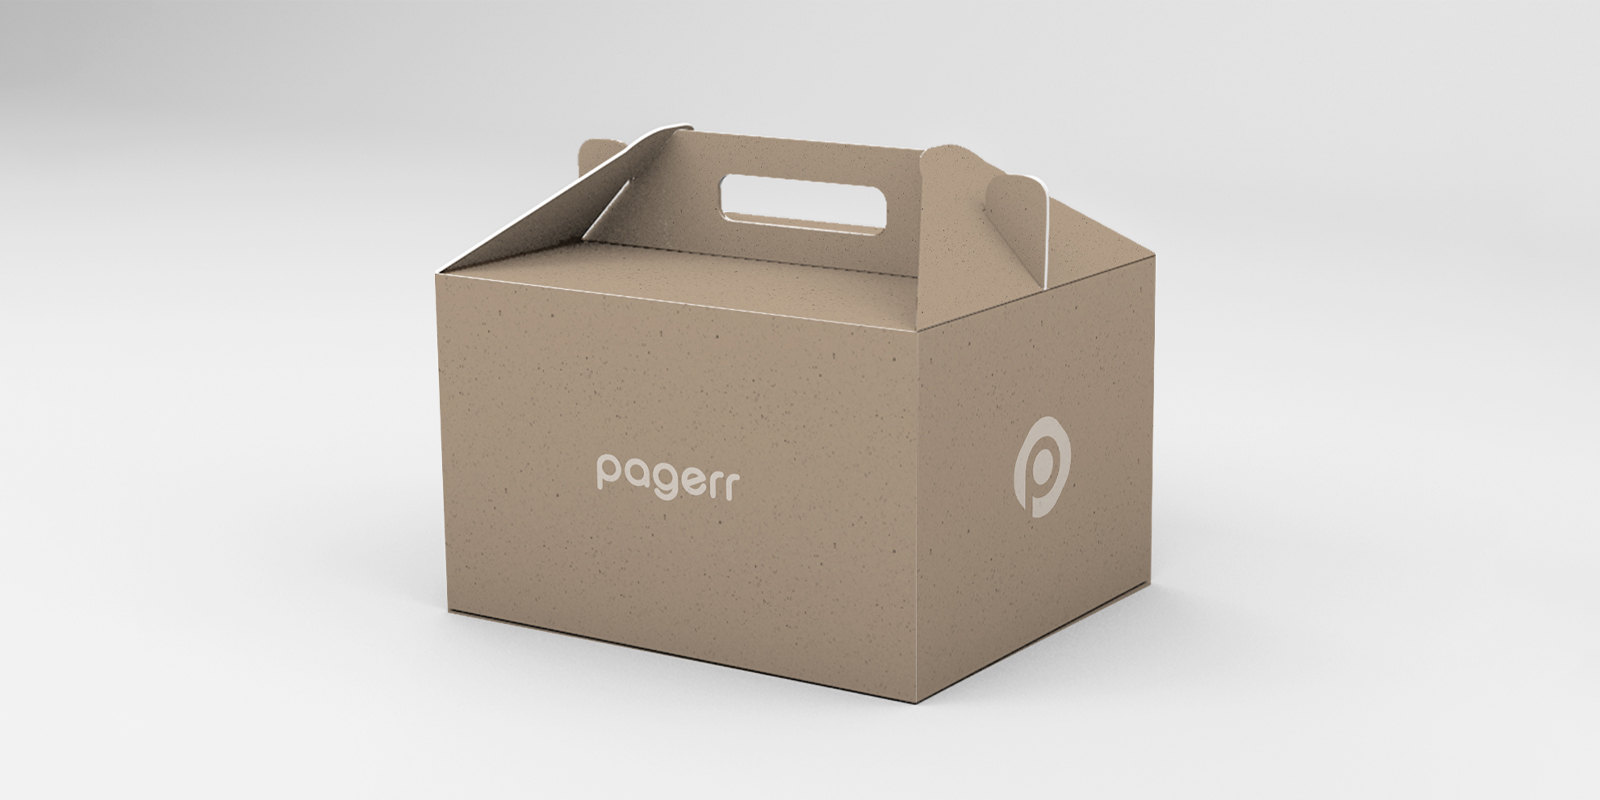 Takeaway boxes in Darwin - Print with Pagerr